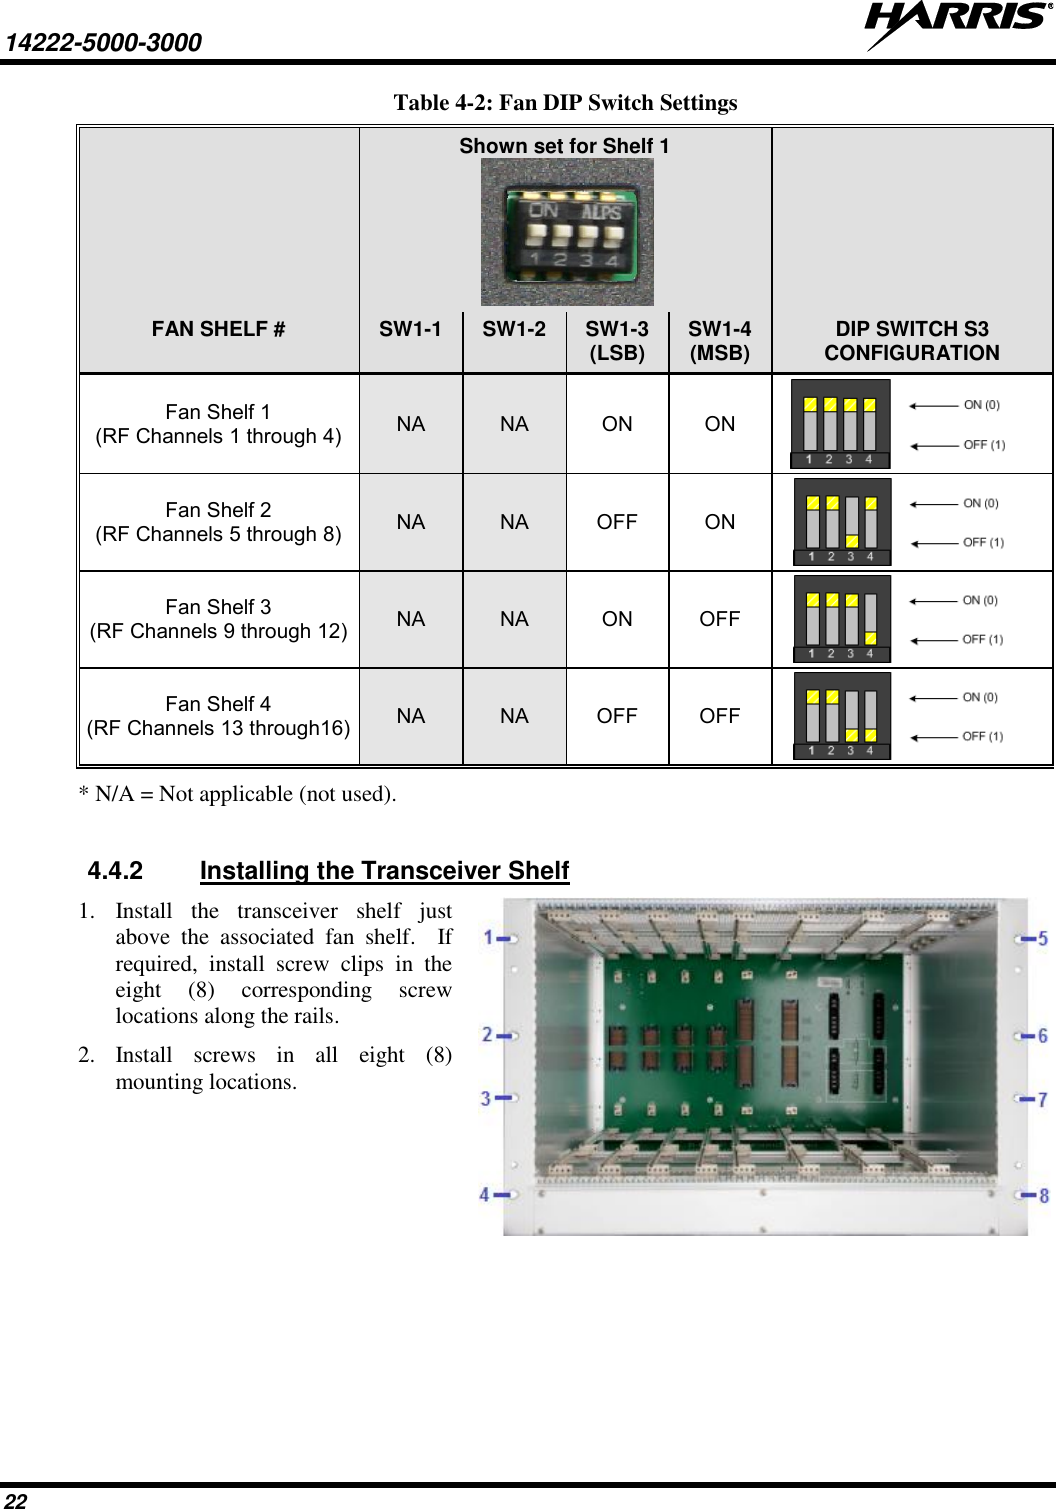 14222-5000-3000     22 Table 4-2: Fan DIP Switch Settings  Shown set for Shelf 1   FAN SHELF # SW1-1 SW1-2 SW1-3 (LSB) SW1-4 (MSB) DIP SWITCH S3 CONFIGURATION Fan Shelf 1  (RF Channels 1 through 4) NA NA ON ON  Fan Shelf 2 (RF Channels 5 through 8) NA NA OFF ON  Fan Shelf 3 (RF Channels 9 through 12) NA NA ON OFF  Fan Shelf 4 (RF Channels 13 through16) NA NA OFF OFF  * N/A = Not applicable (not used).  4.4.2  Installing the Transceiver Shelf 1. Install  the  transceiver  shelf  just above  the  associated  fan  shelf.    If required,  install  screw  clips  in  the eight  (8)  corresponding  screw locations along the rails. 2. Install  screws  in  all  eight  (8) mounting locations.  